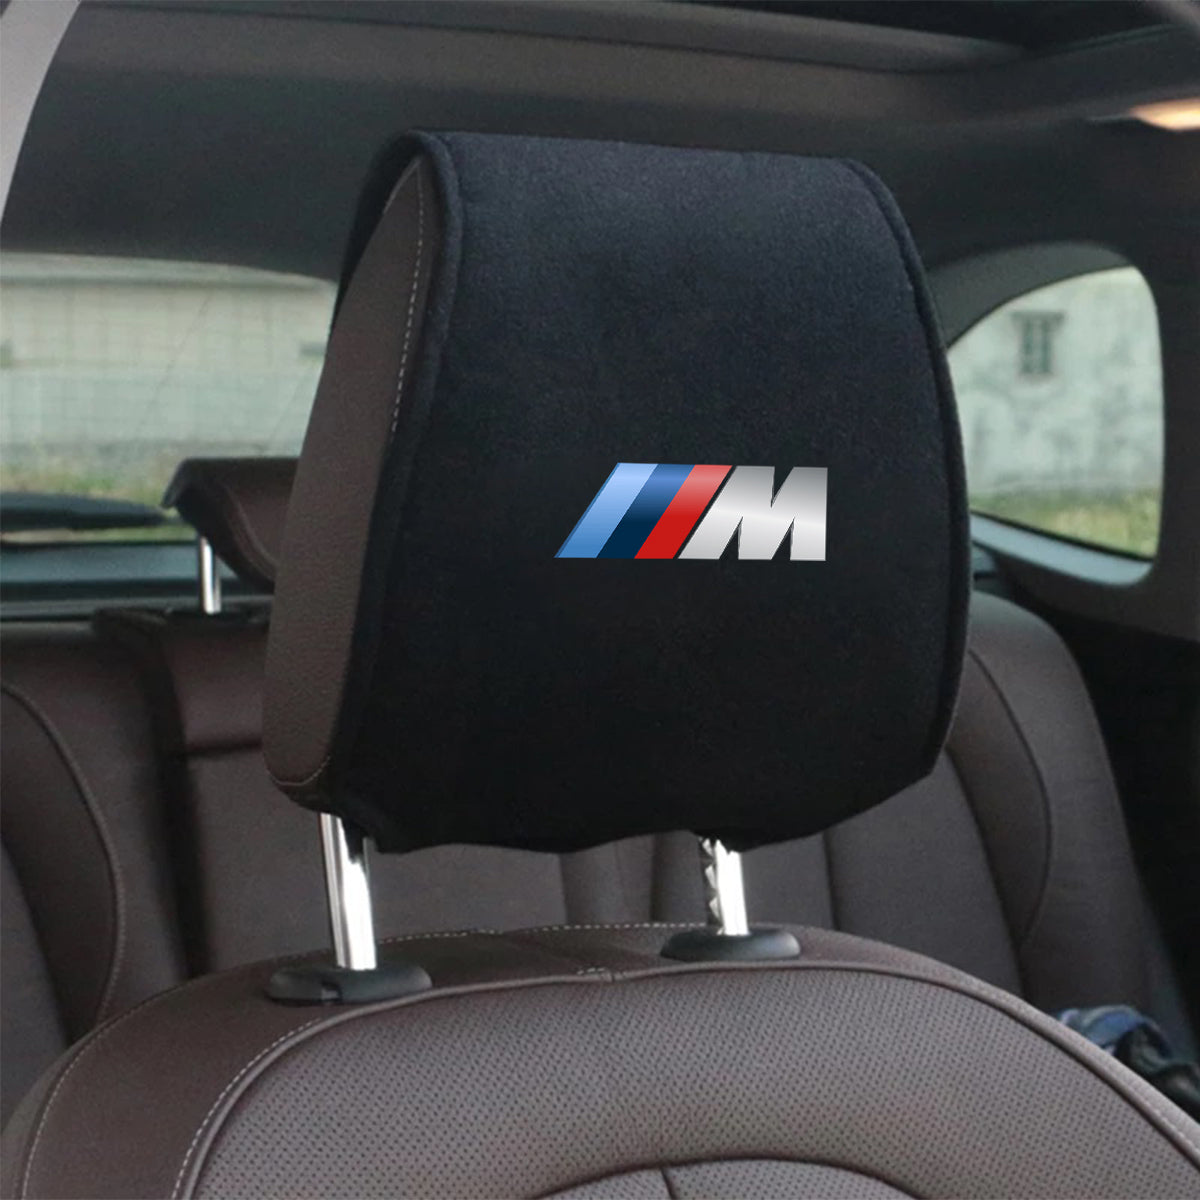 BMW M Sport Car Seat Headrest Cover: Stylish Protection for Your Vehicle's Headrests